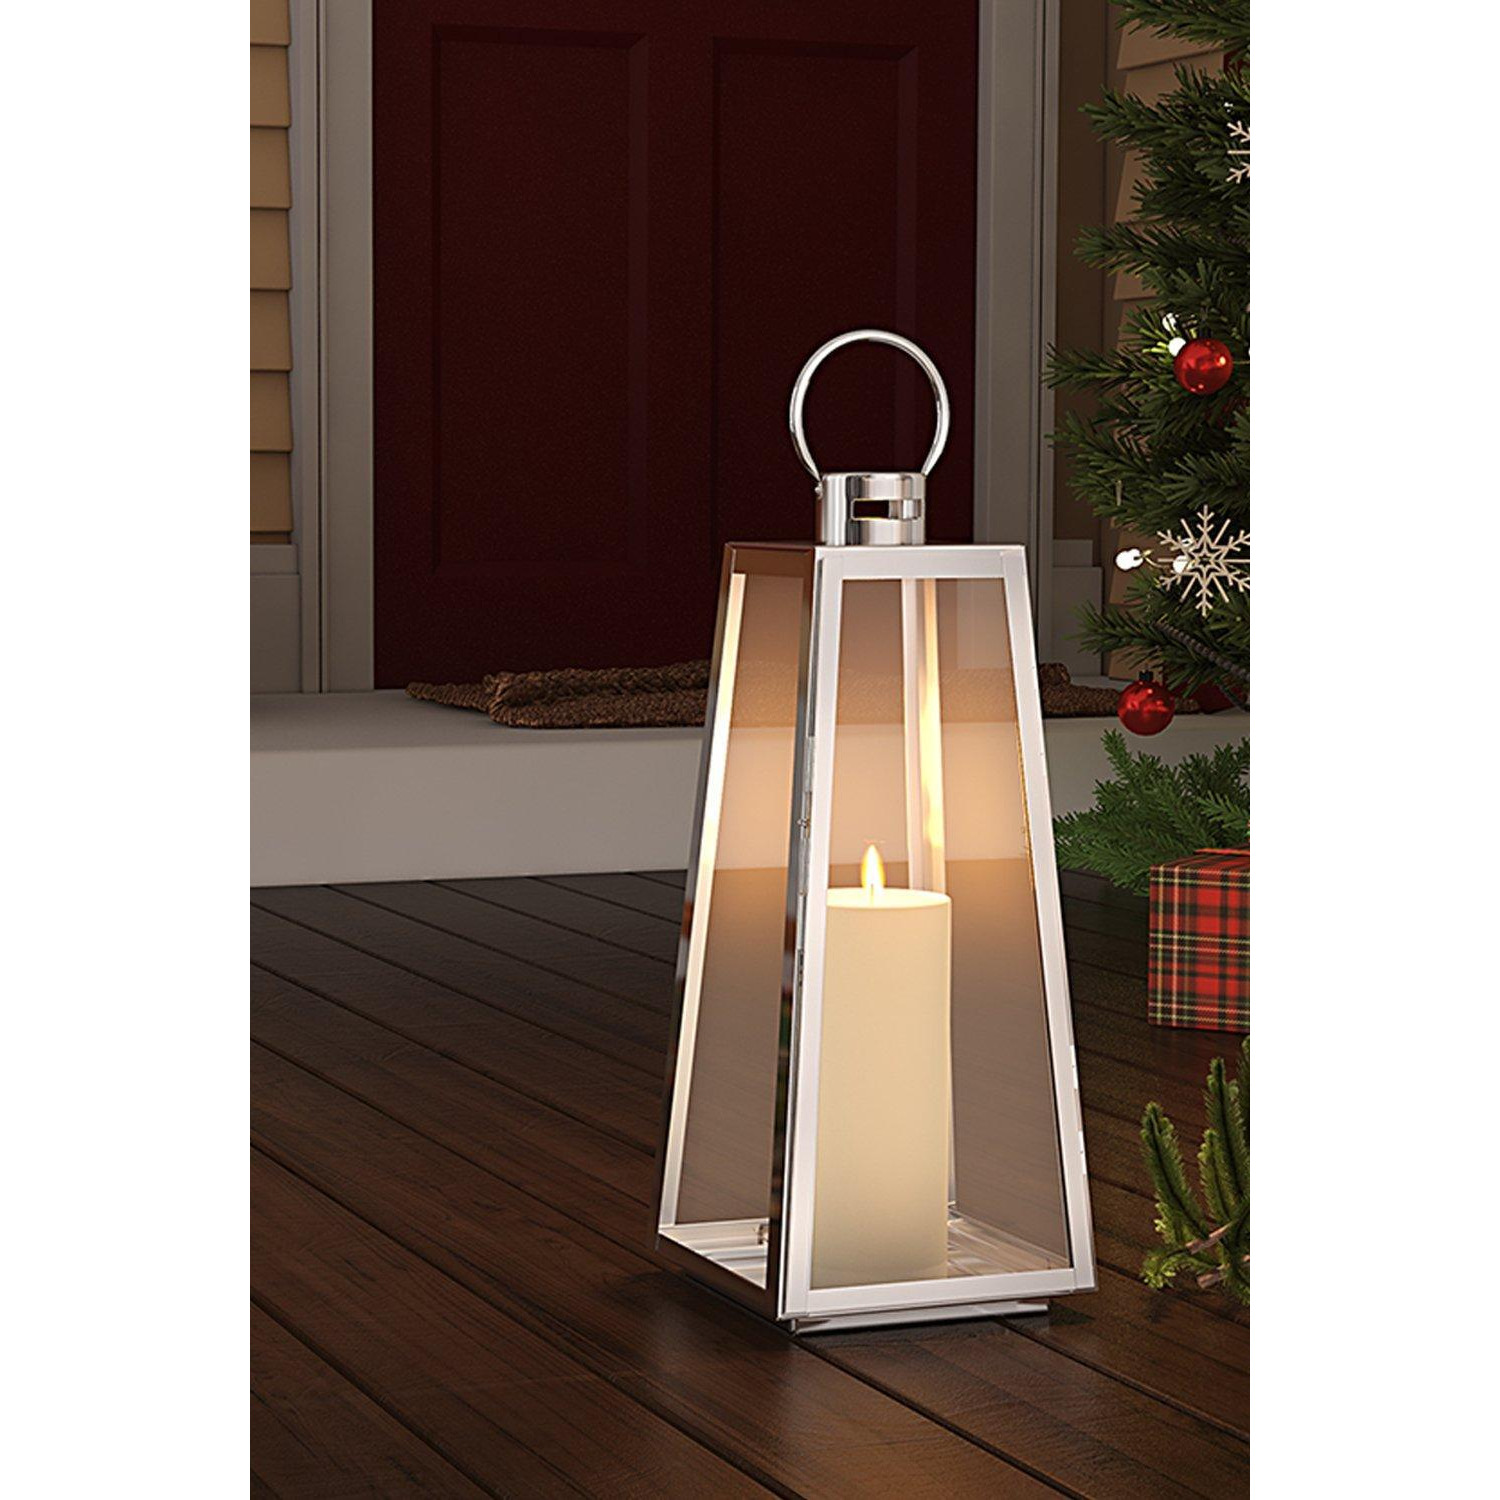 54cm H Stainless Steel Tapered Lantern Candle Holder - image 1